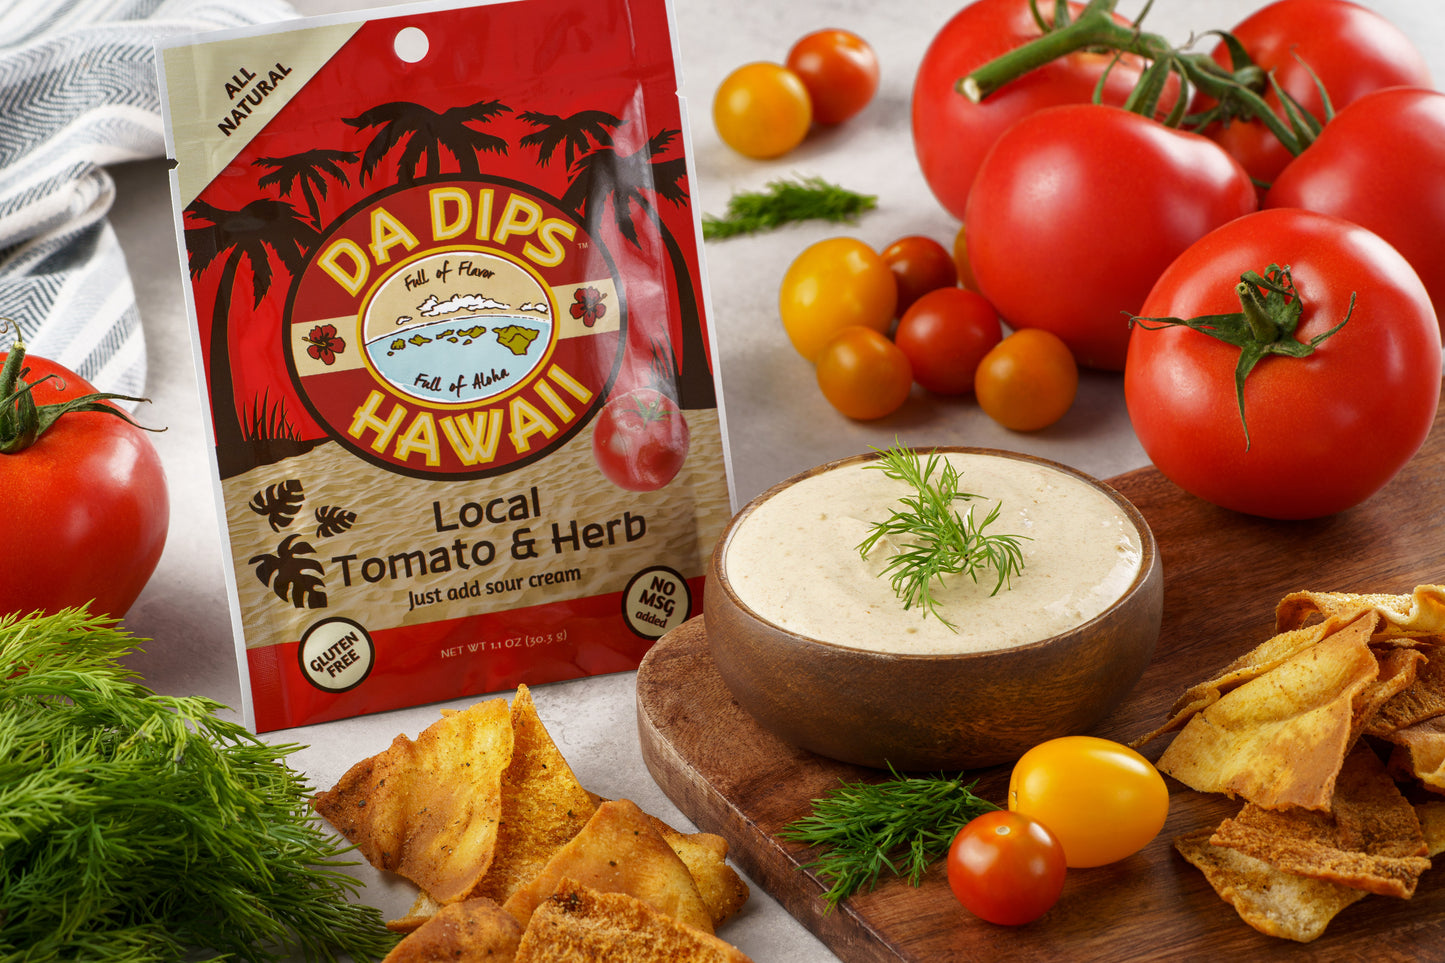 DA DIPS Hawaii Dip Mixes (1.1oz - 30.3g) - Pack of 4 Local Tomato & Herb Spice Packets